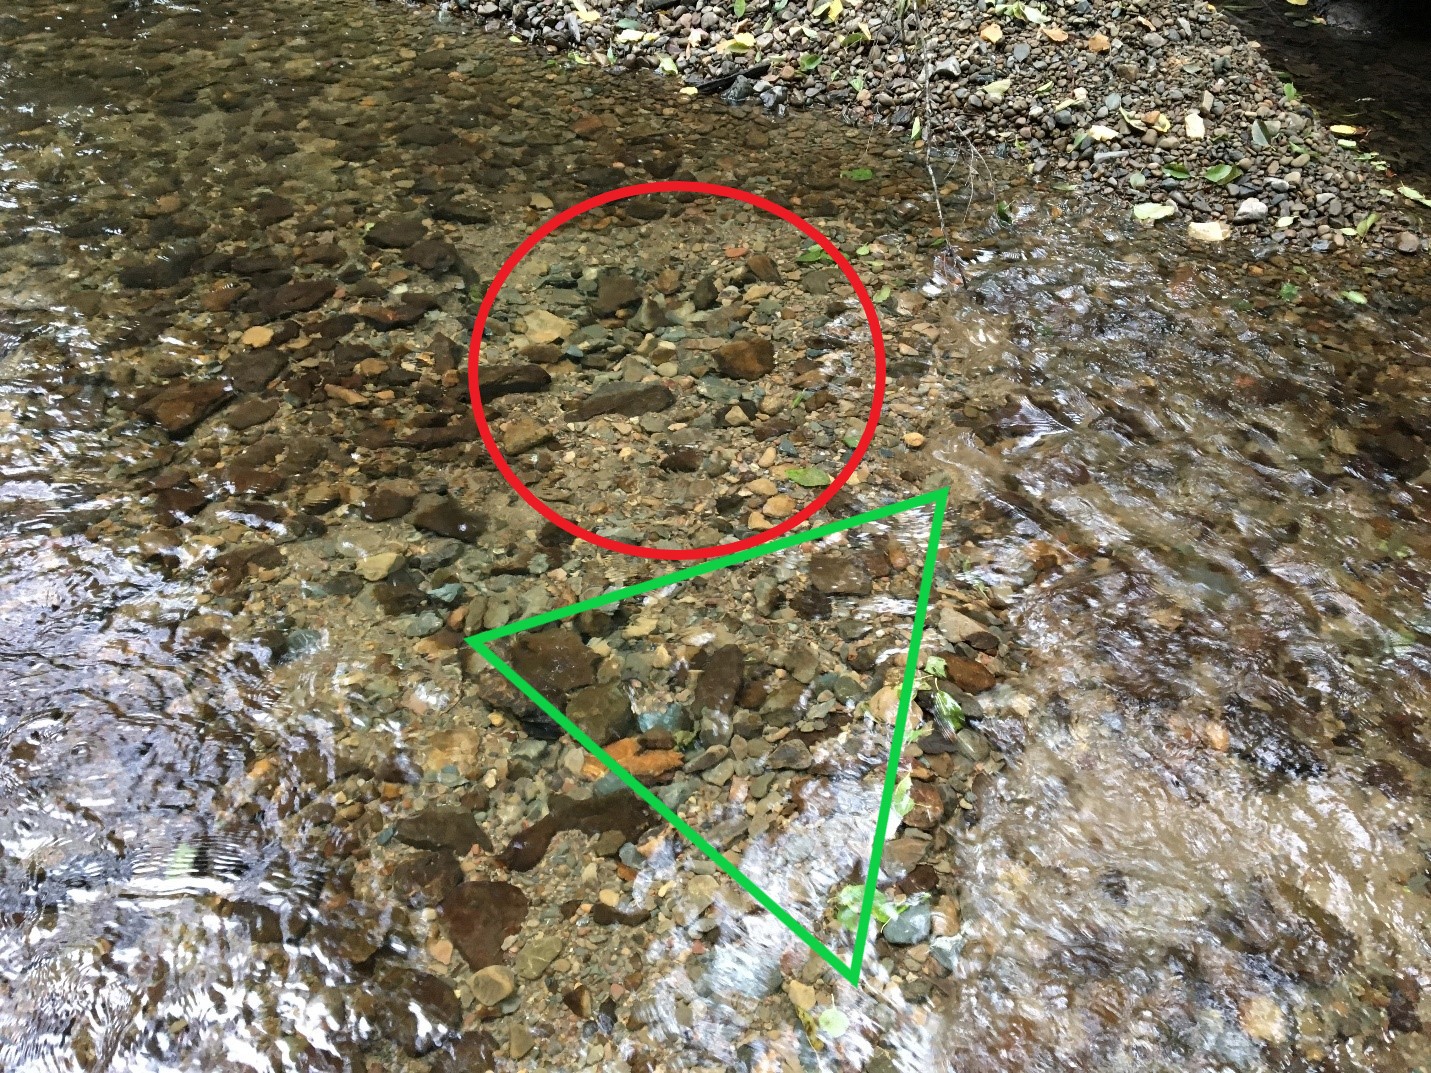  A classic coho salmon redd, the red circle is the pot and the green  triangle is the tail spill